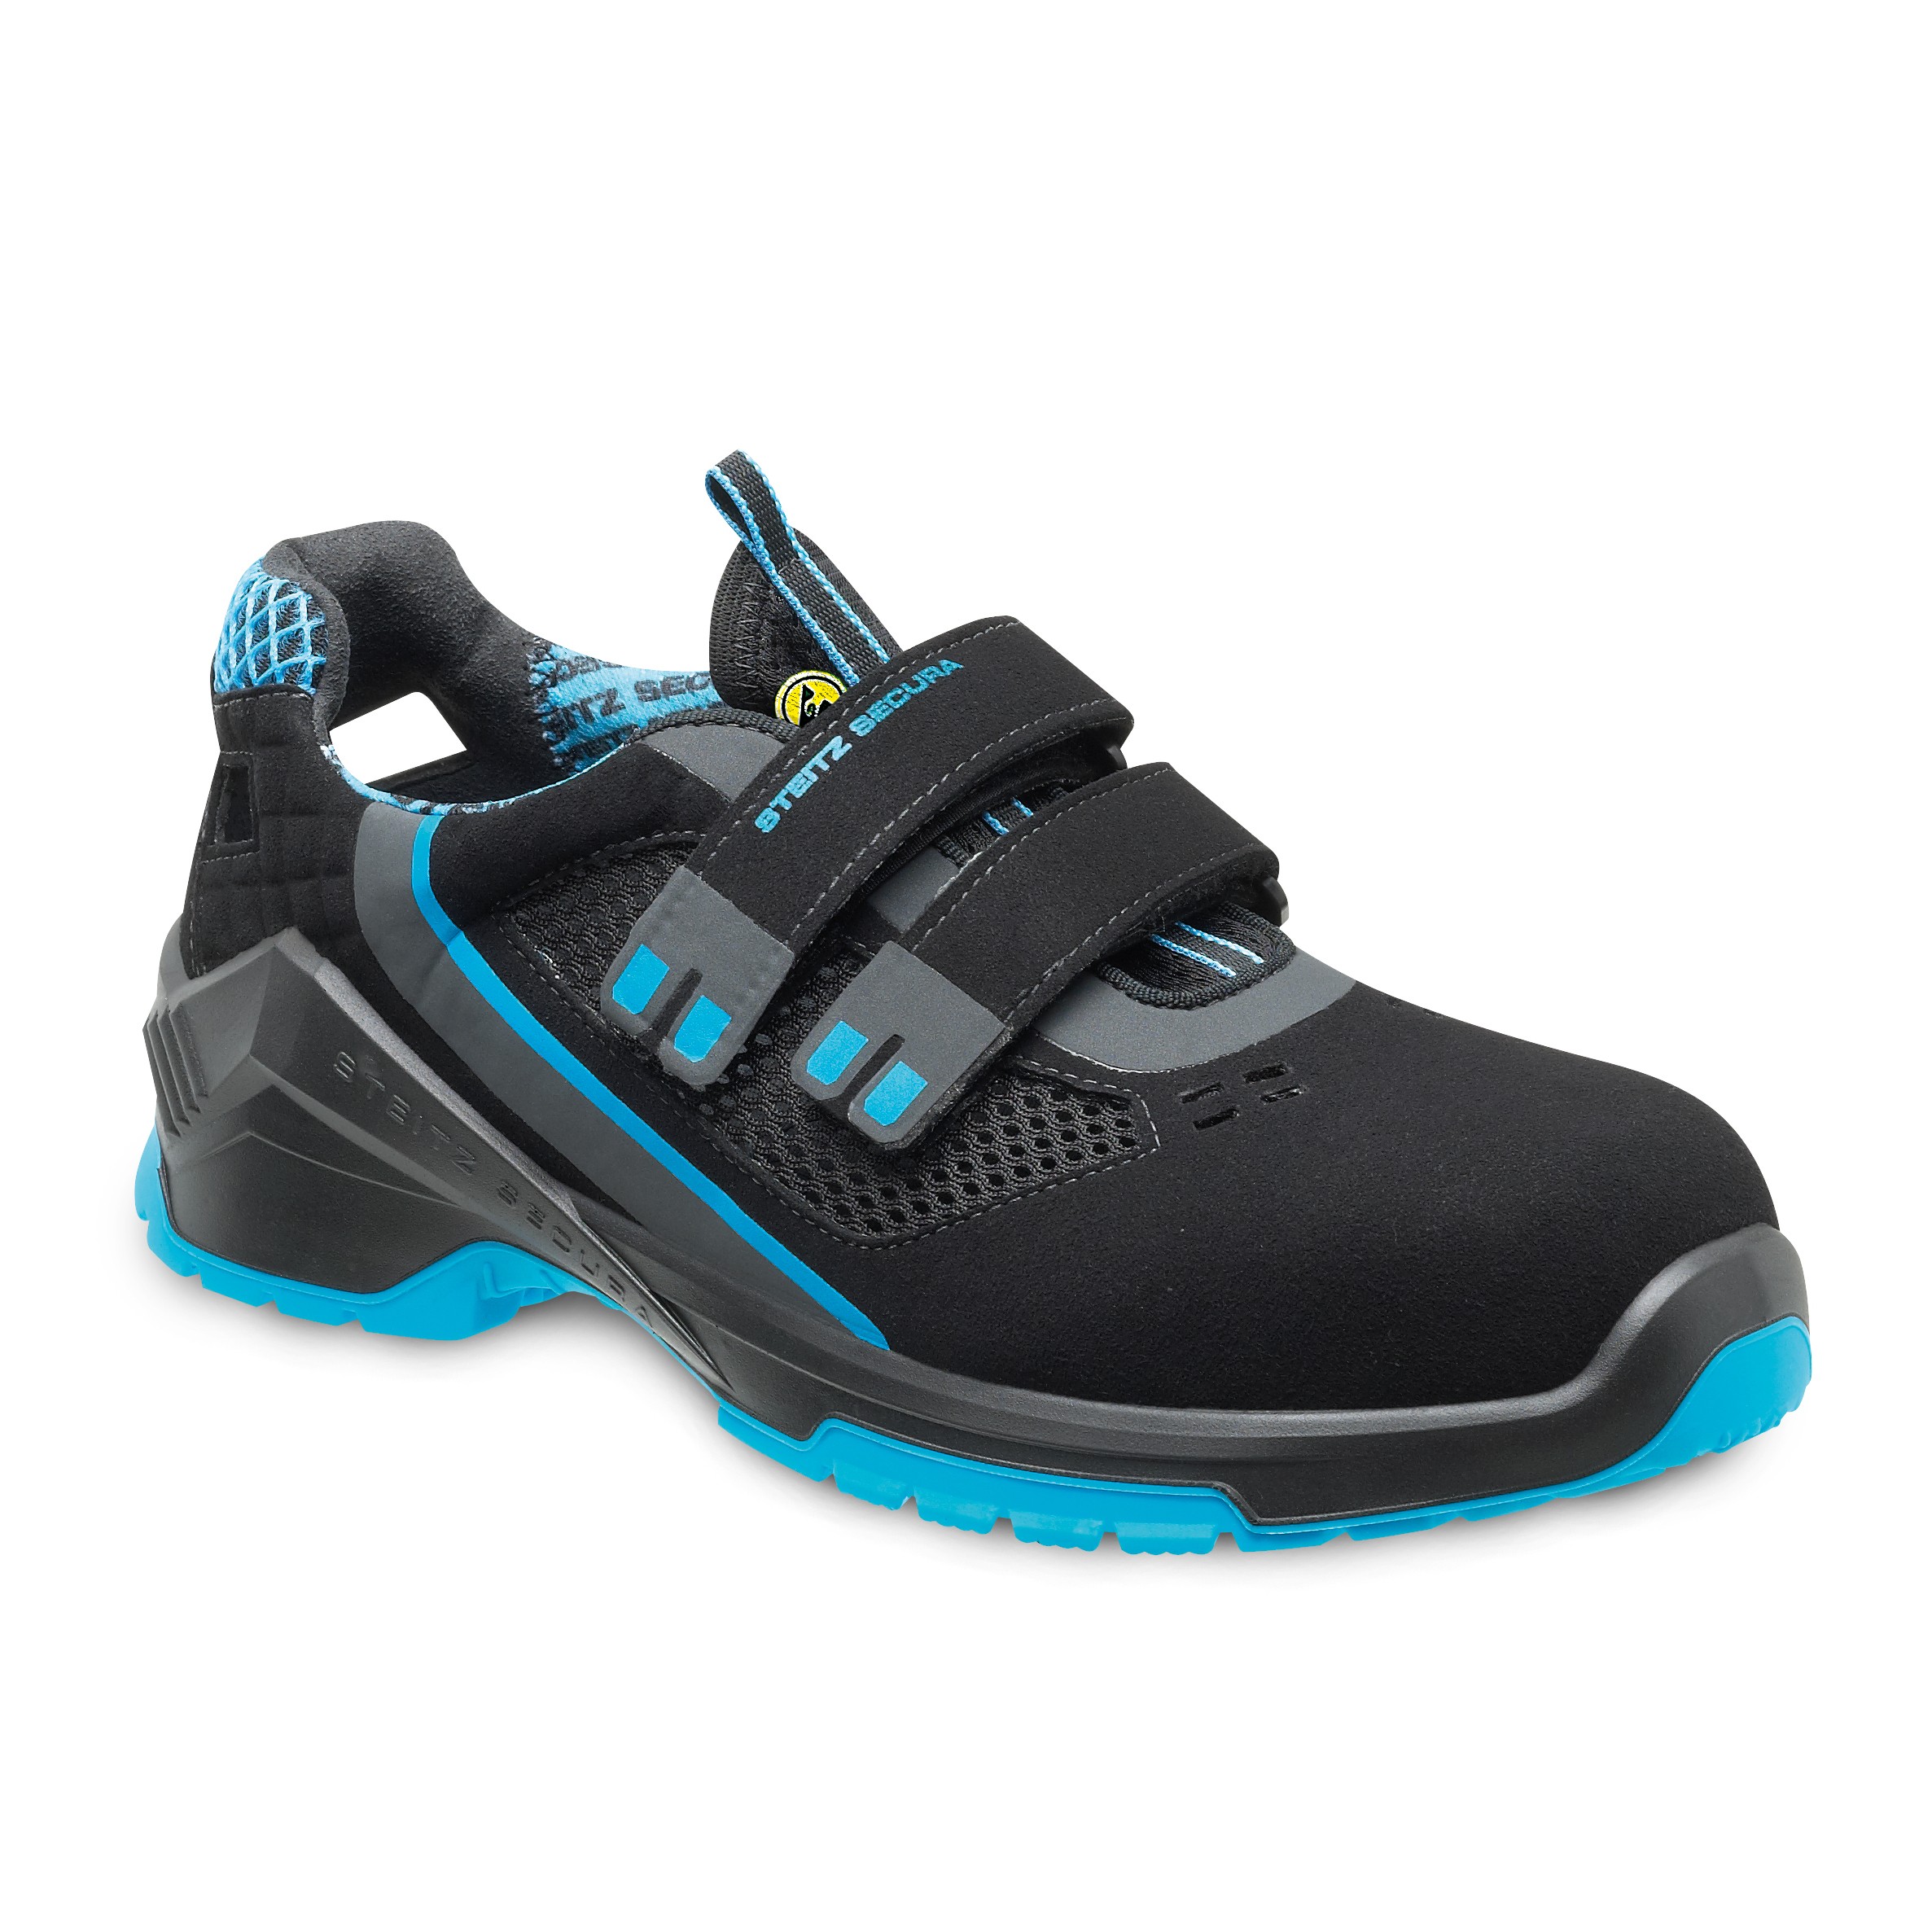 VD PRO 1000 ESD SAFETY SHOE S1 - STEITZ SECURA